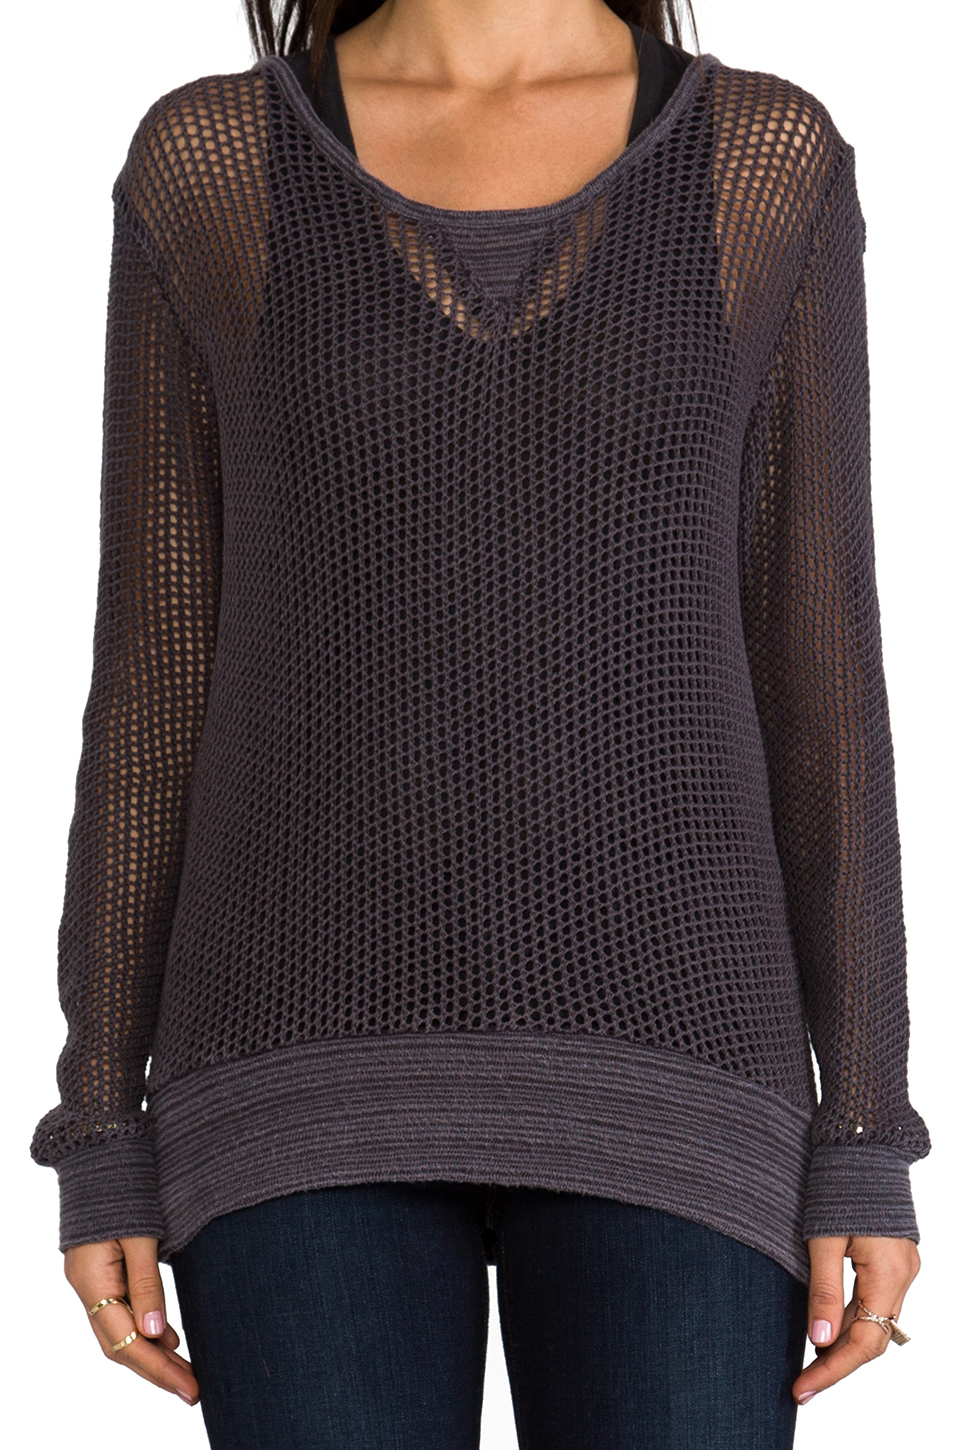 Lyst - Monrow Cotton Mesh Sweater in Charcoal in Gray